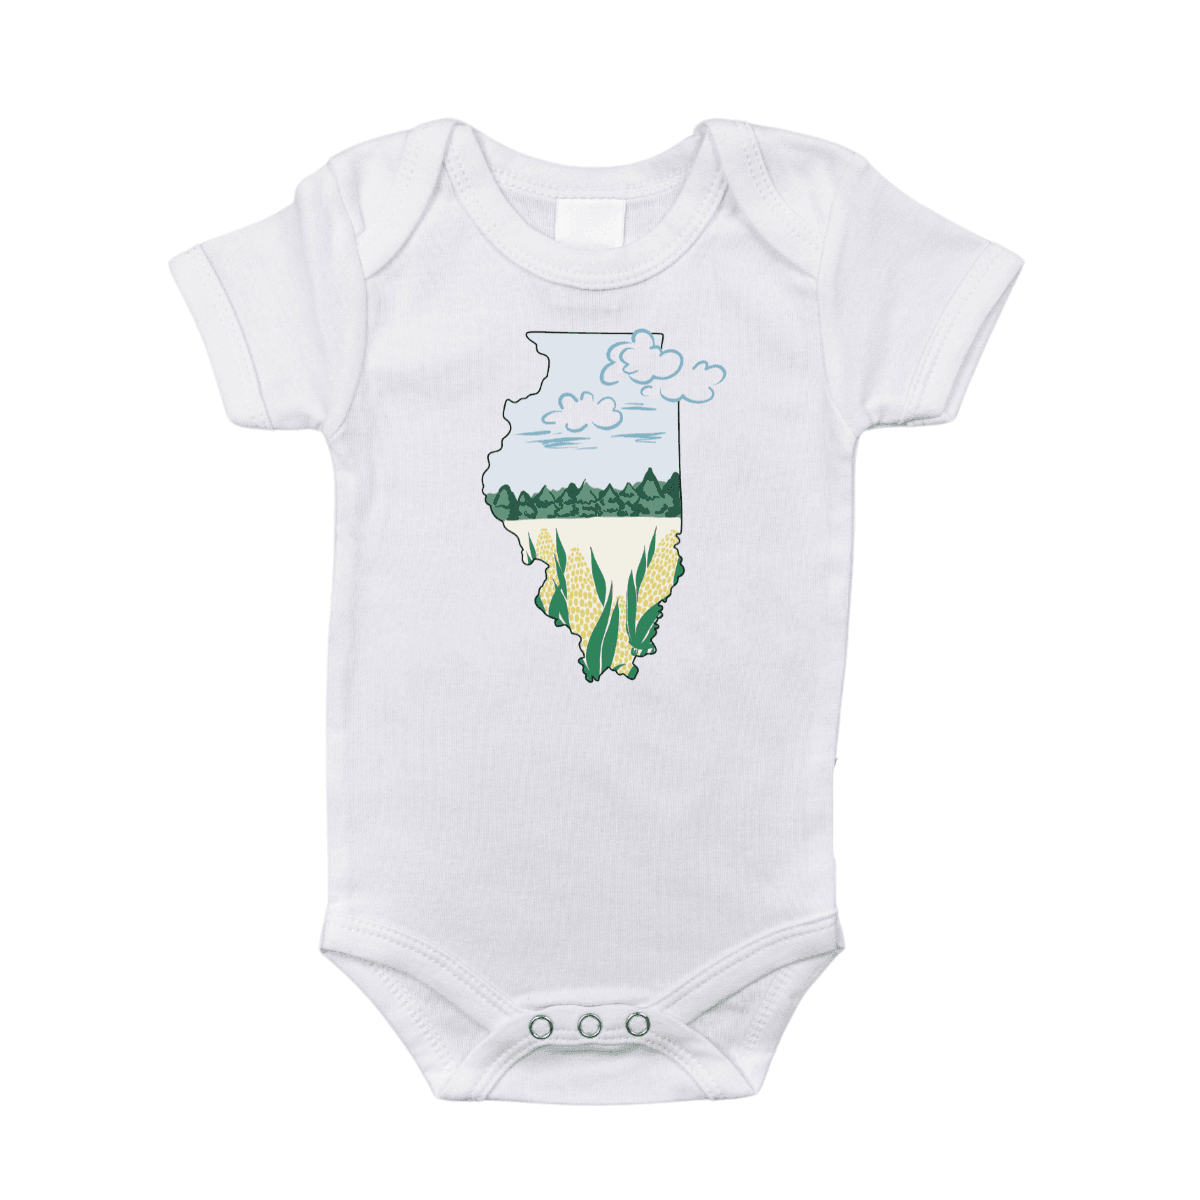 Baby onesie with "Illinois Cornfield" text, featuring a cute corn graphic on a soft, light blue fabric.